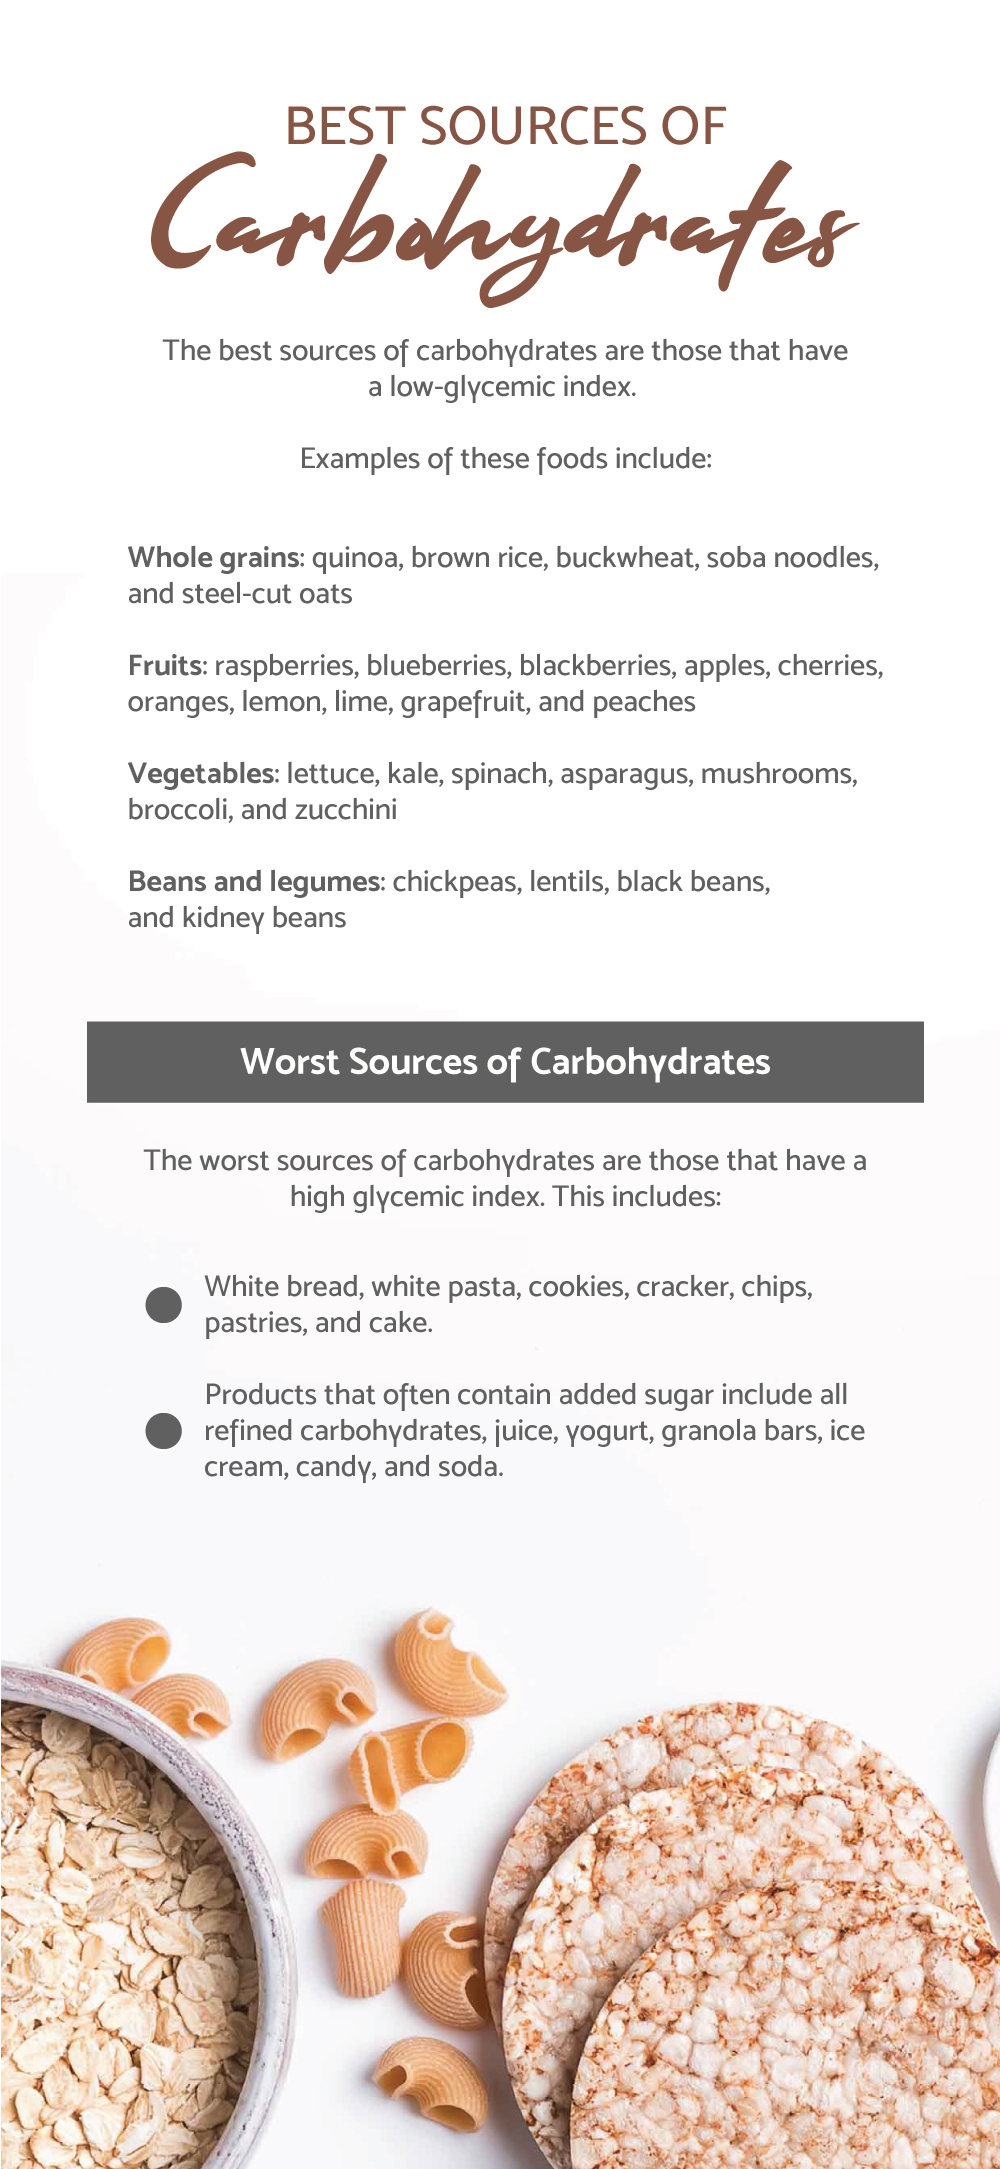 Best Sources of Carbohydrates